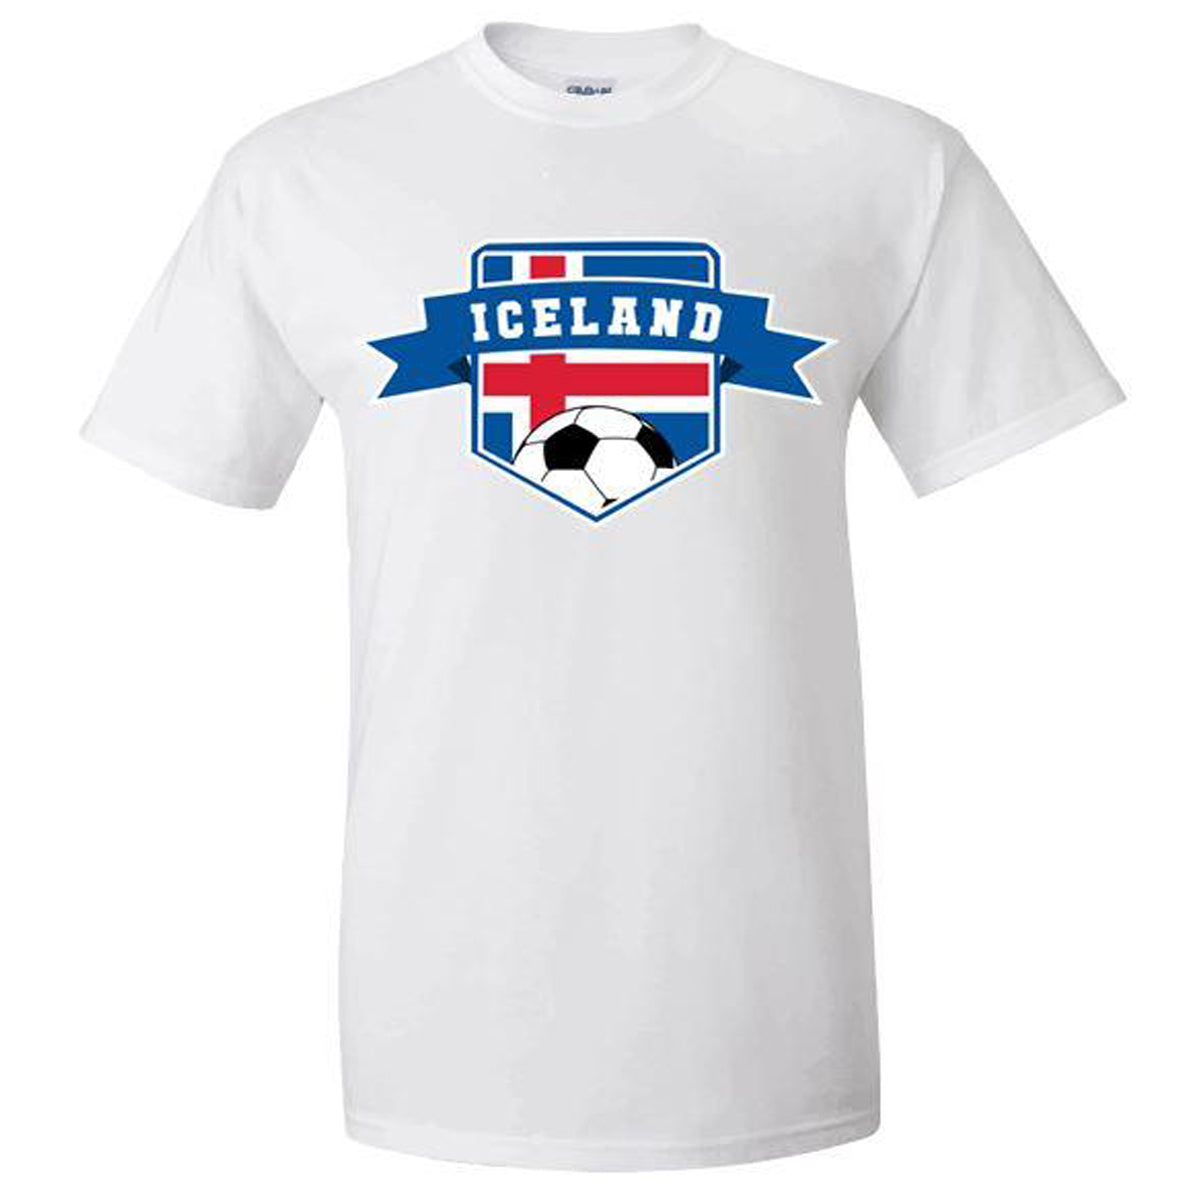 Iceland World Cup 2022 Spirit Tee | Various Designs Shirt 411 Banner Youth Medium Youth